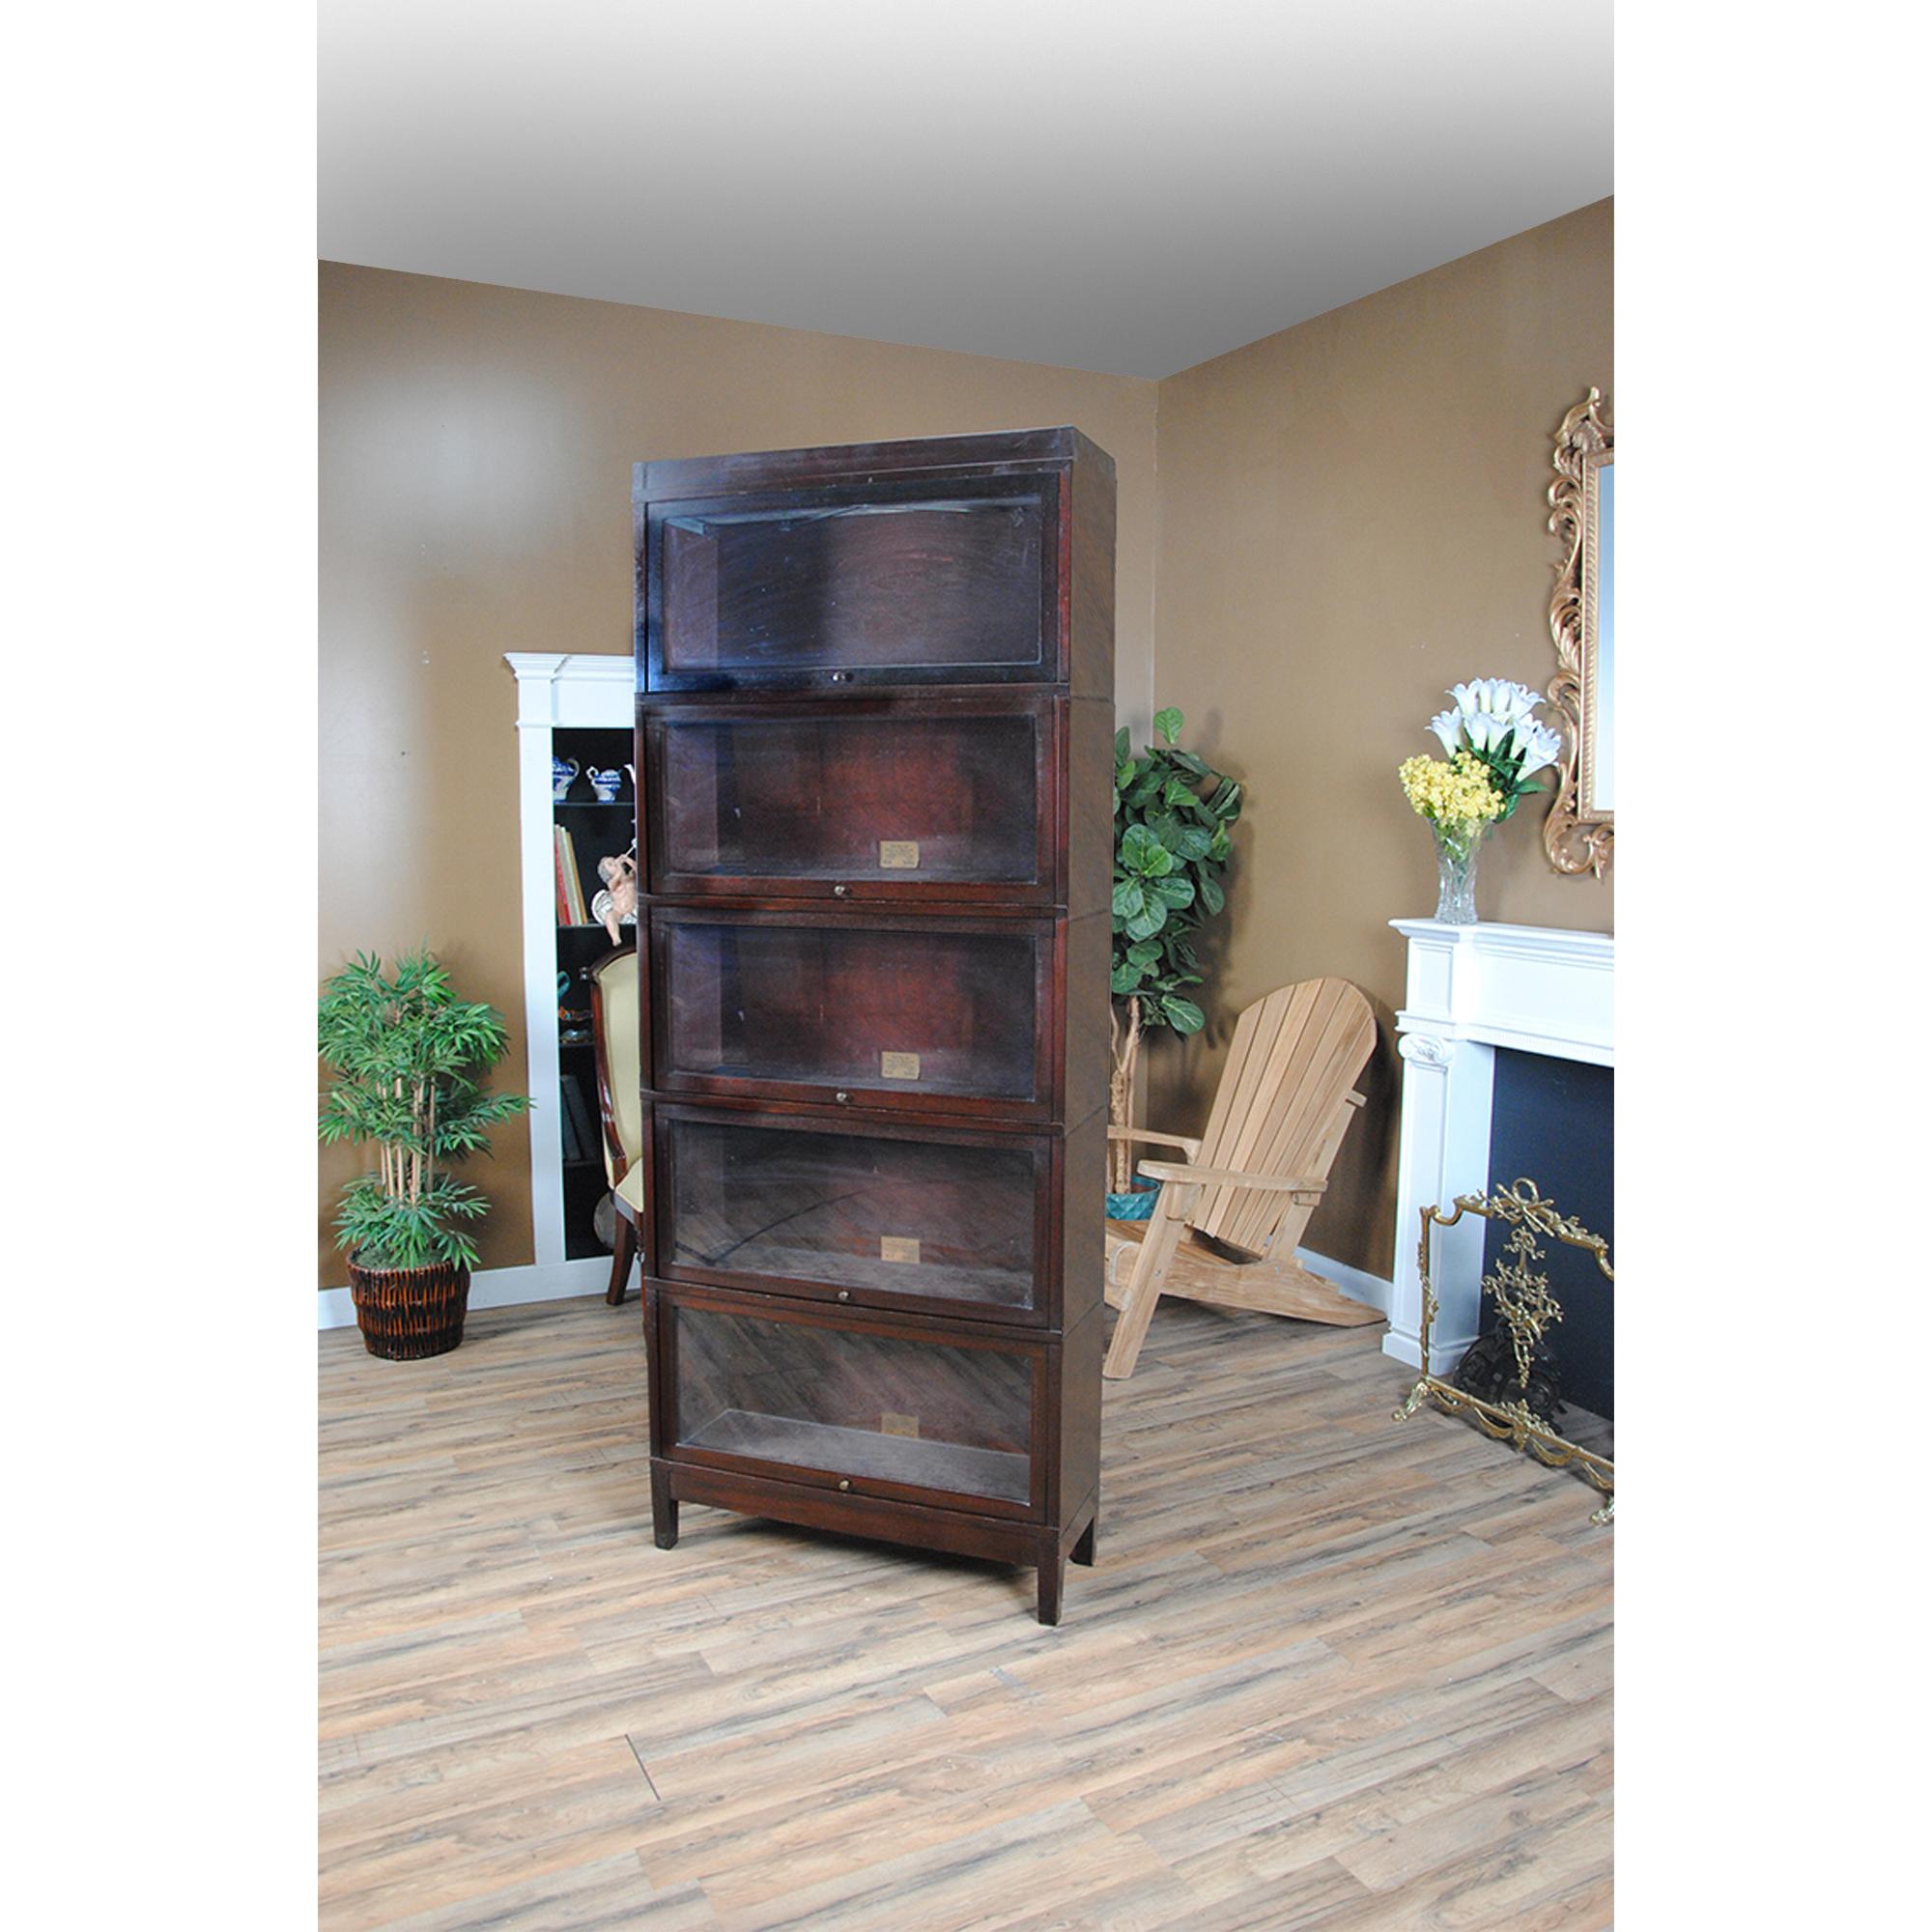 A Vintage Mahogany Globe Wernicke Bookcase – the perfect addition to any home or office space! Crafted from high-quality mahogany wood, this bookcase is about 100 years old but still exudes the same elegance and sophistication as when it was first